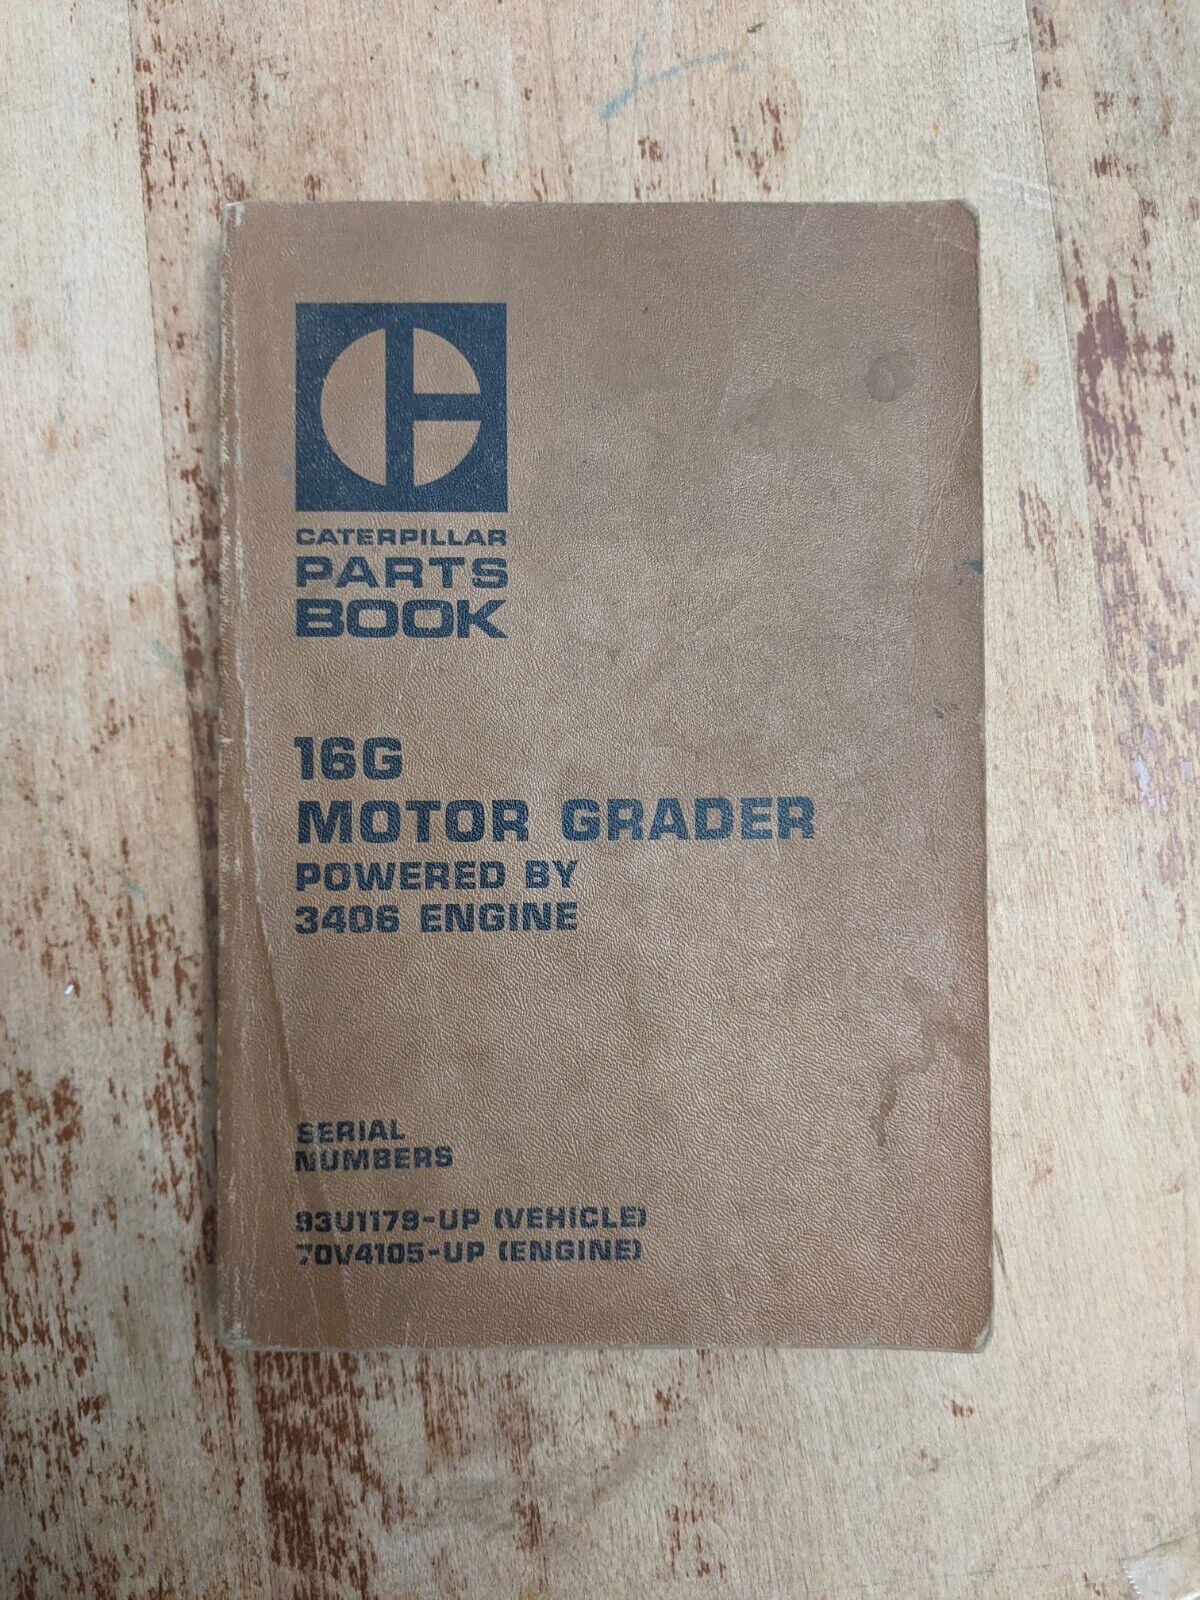 Vintage 1977 Caterpillar Parts Book For 16G Motor Grader Powered By 3406 Engine